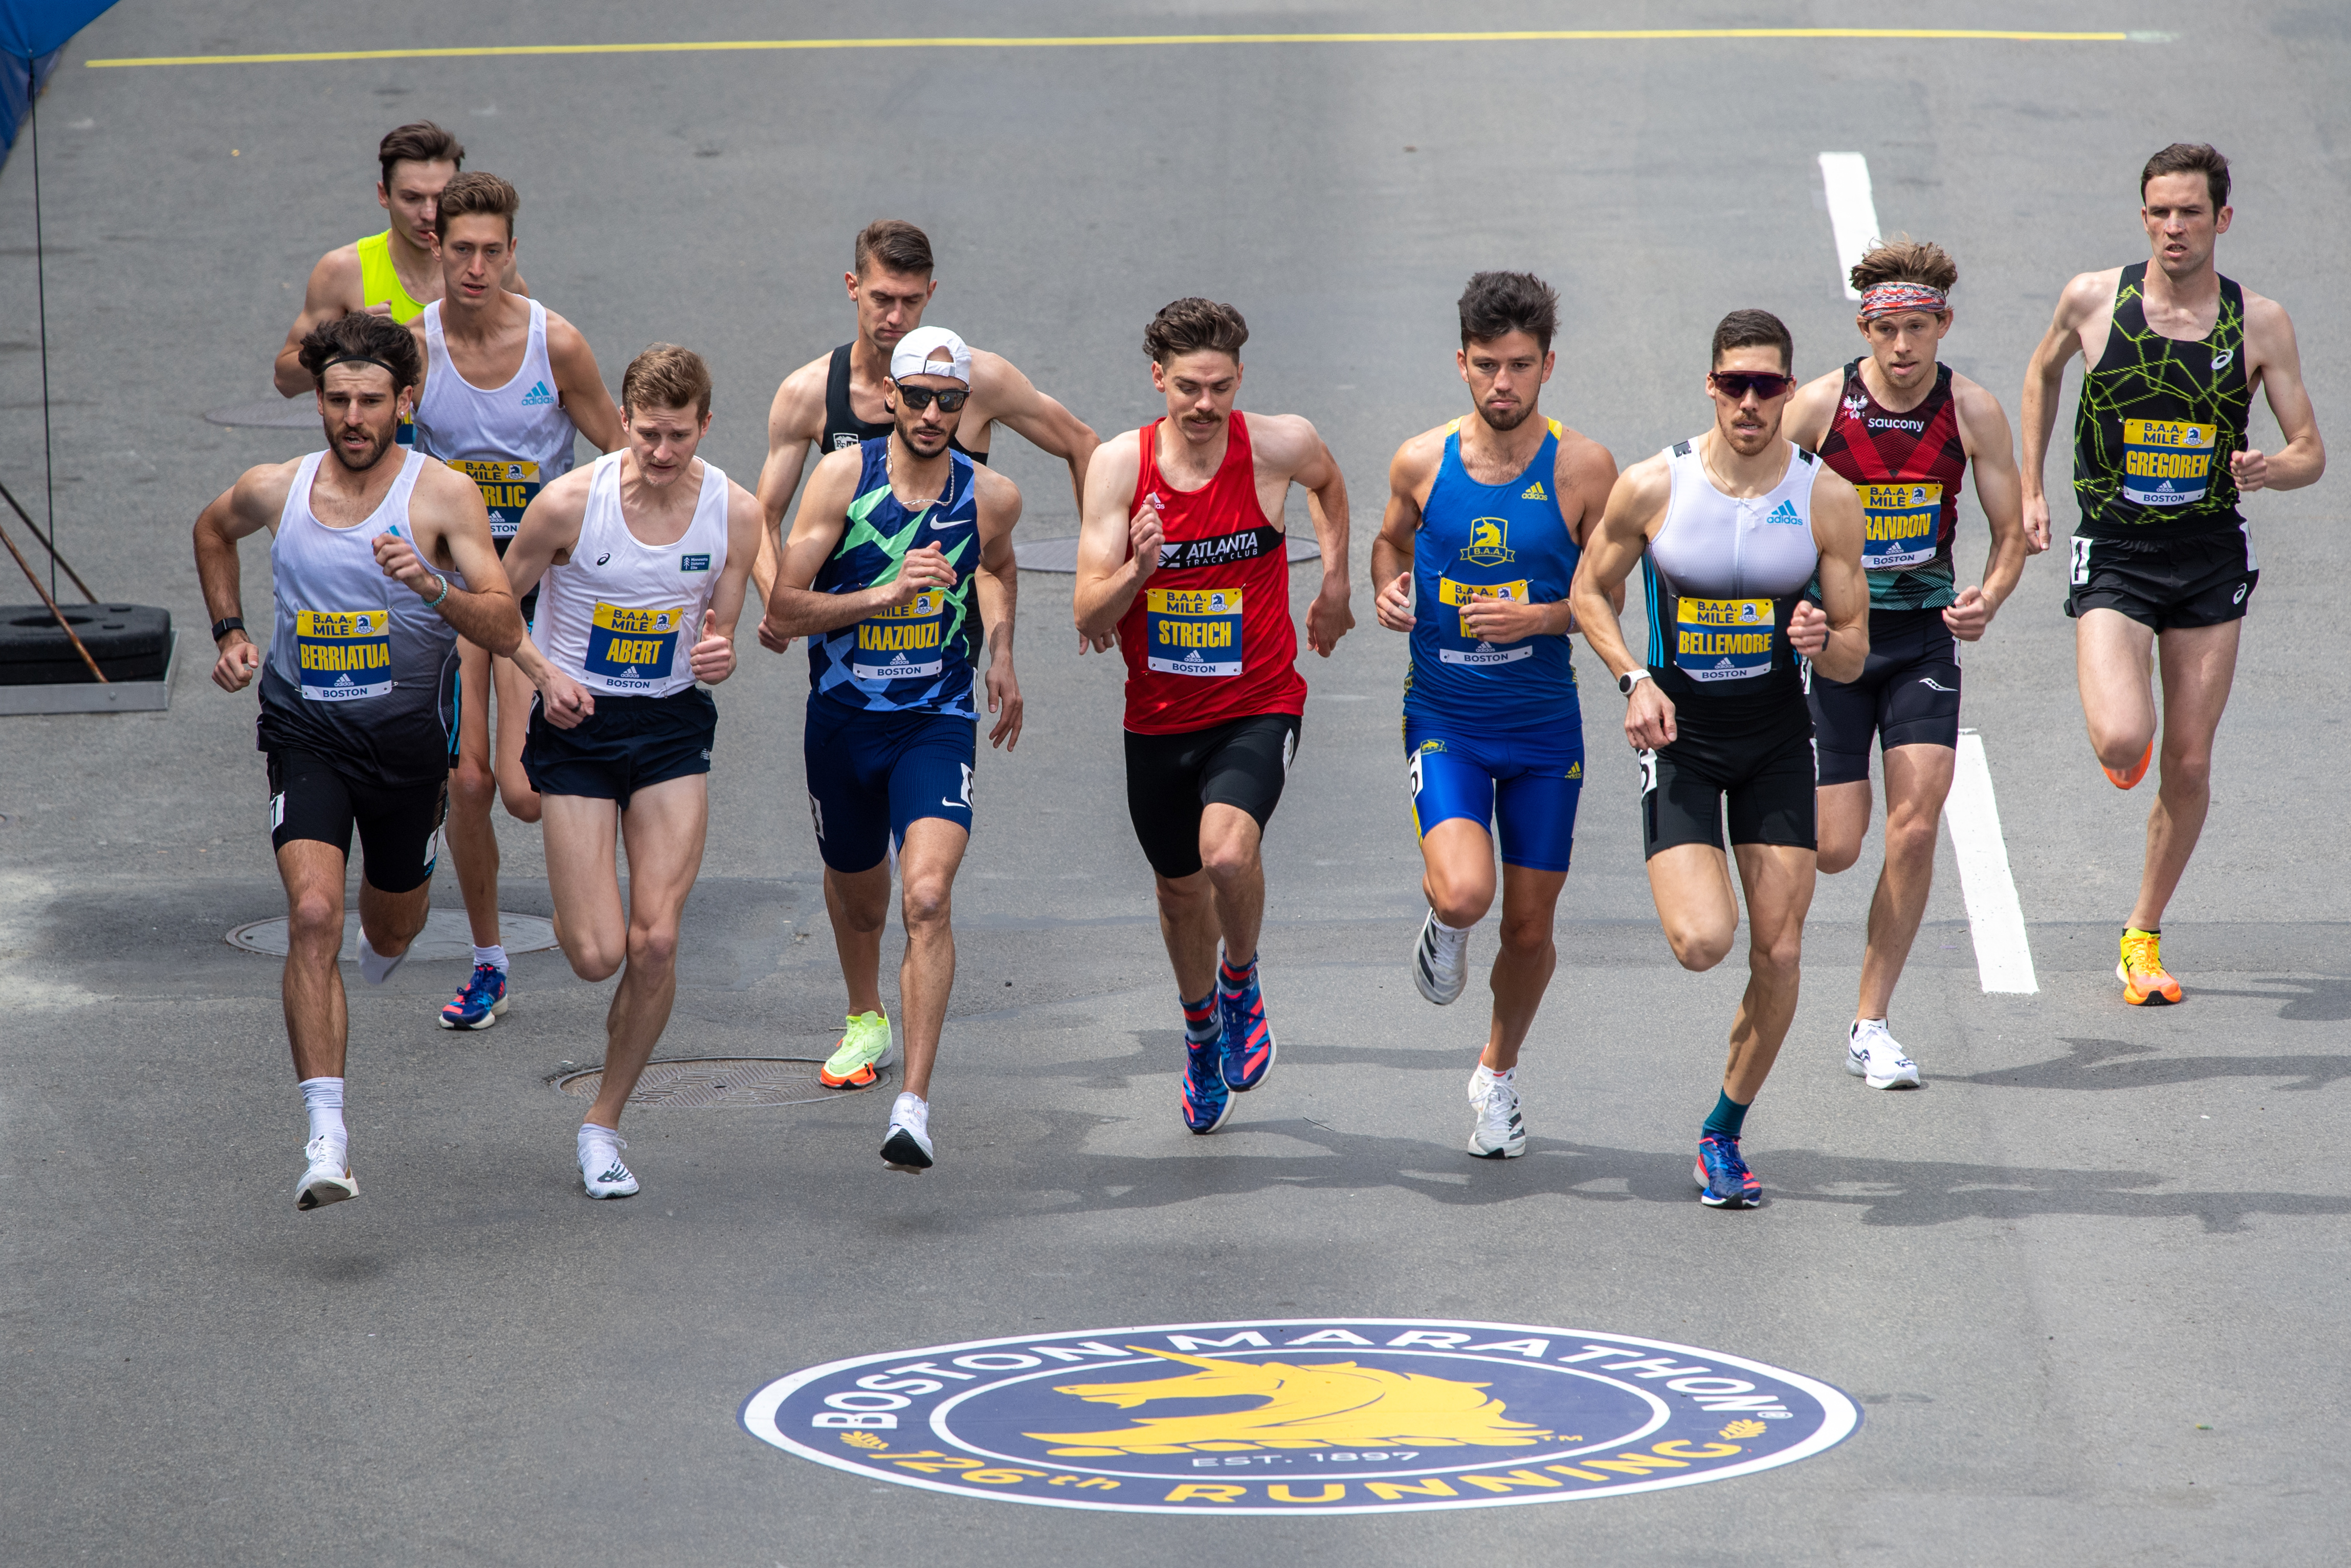 Runners in the men’s professional race run shortly after crossing the starting line of the BAA Invitational Mile on April 16, 2022 on Boylston Street in Boston, MA.